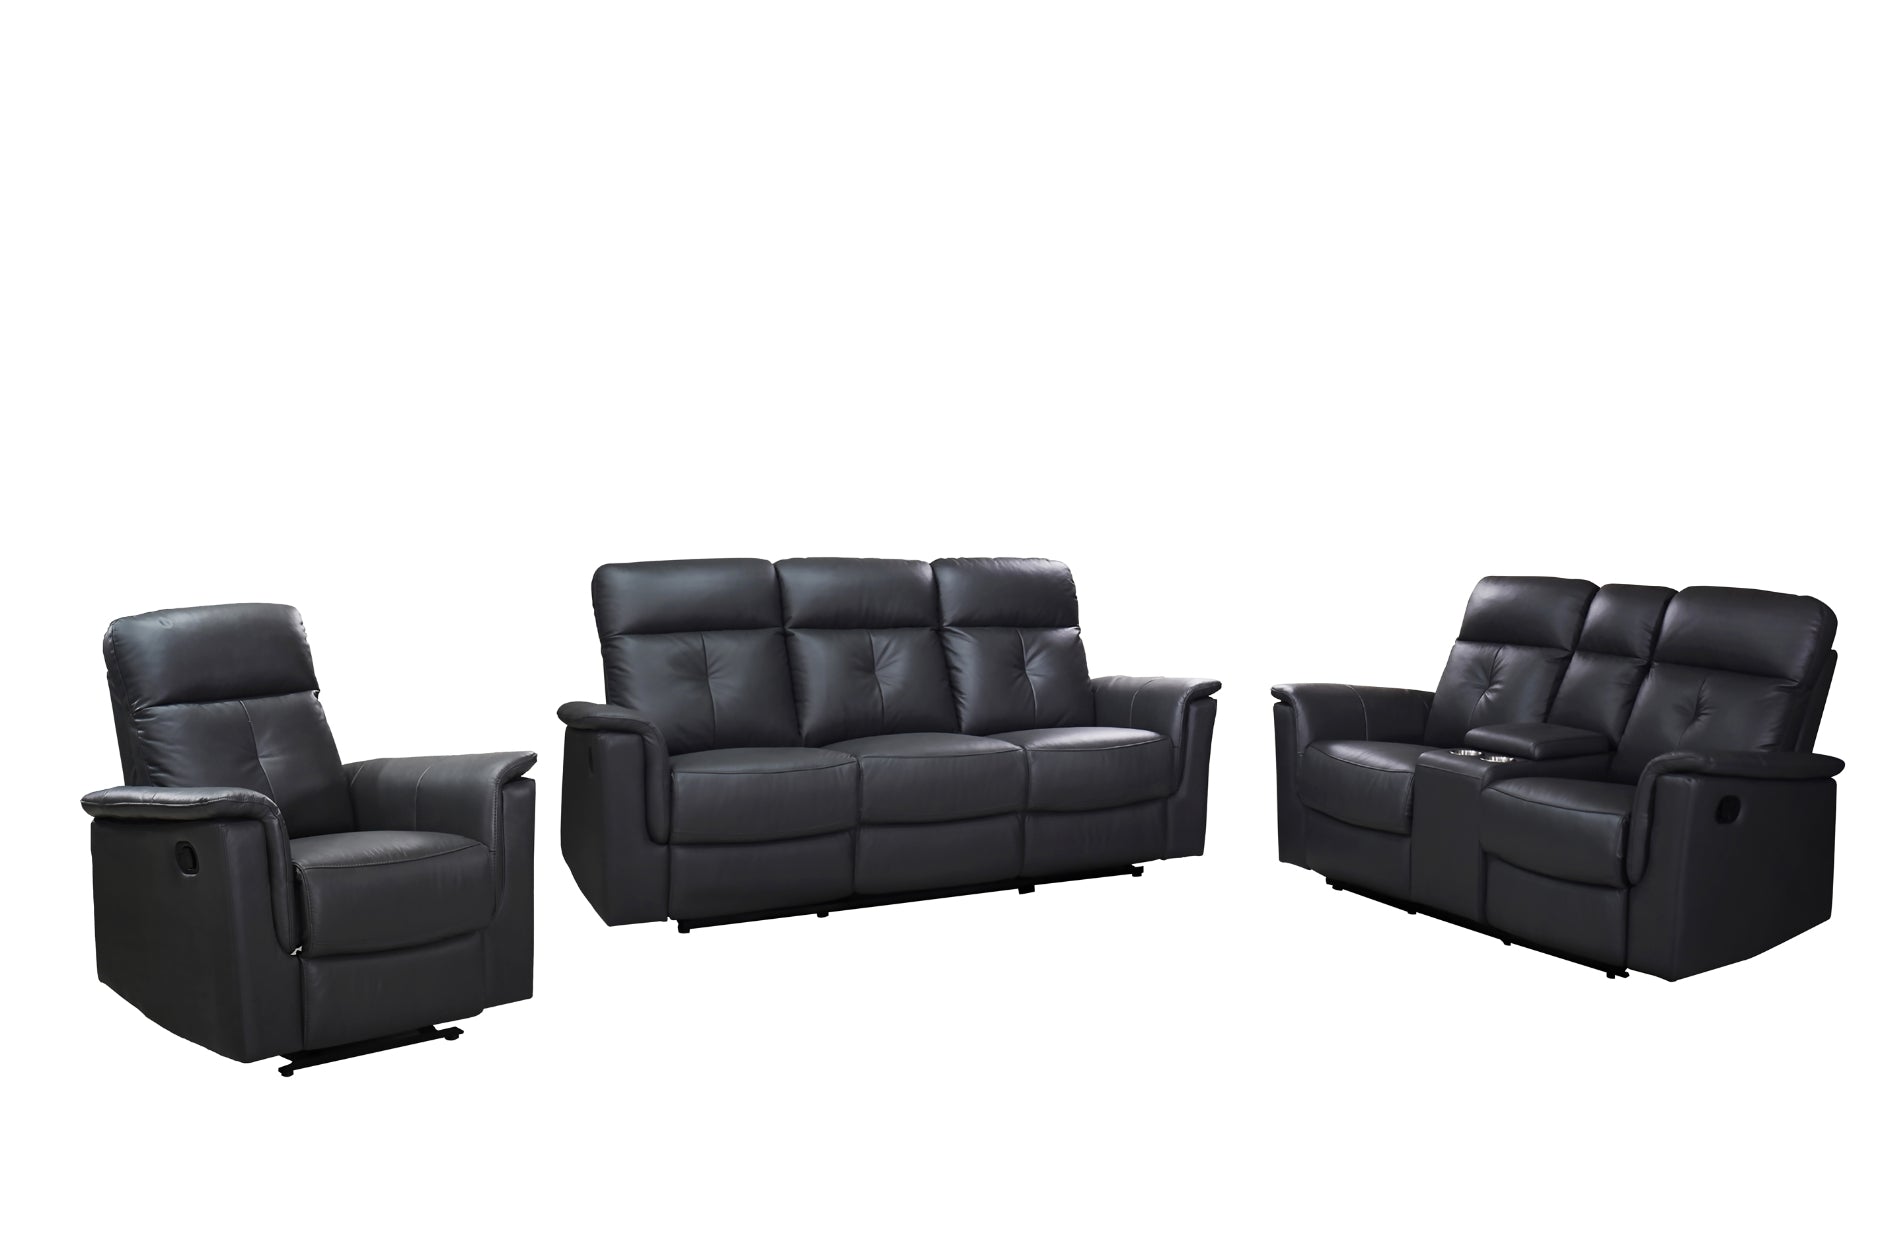 Dark Grey Top Grain Leather Ellesmere Reclining Sofa Collection 99944DGY